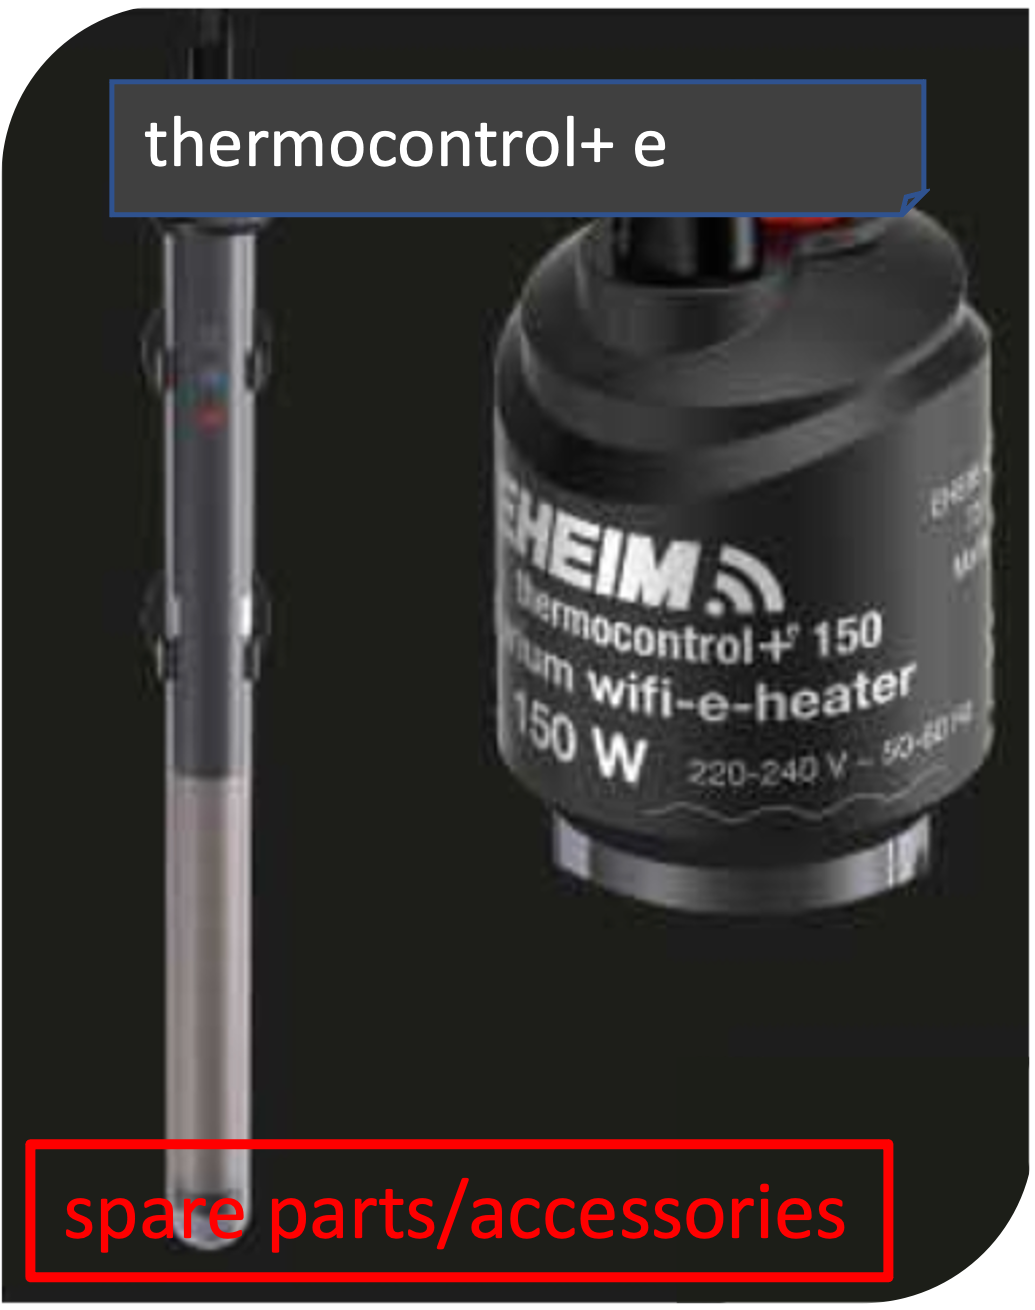 Here you find spare parts and accessories for EHEIM thermocontrol+e